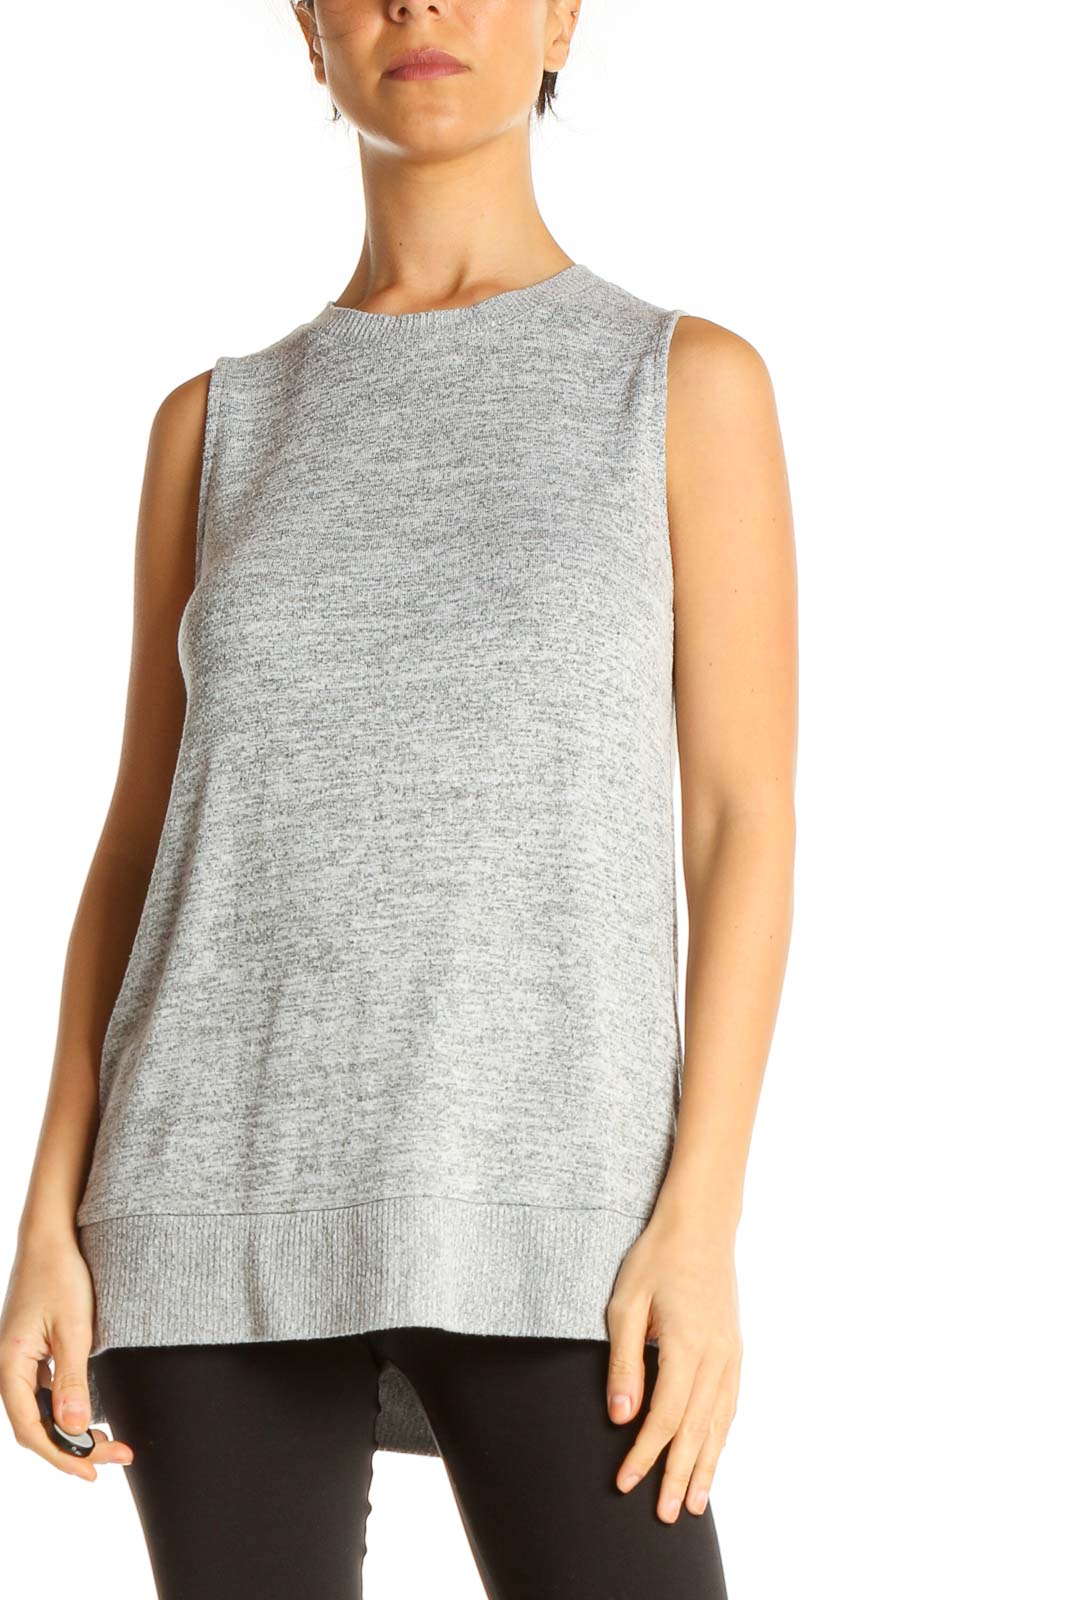 Gray All Day Wear Top Front